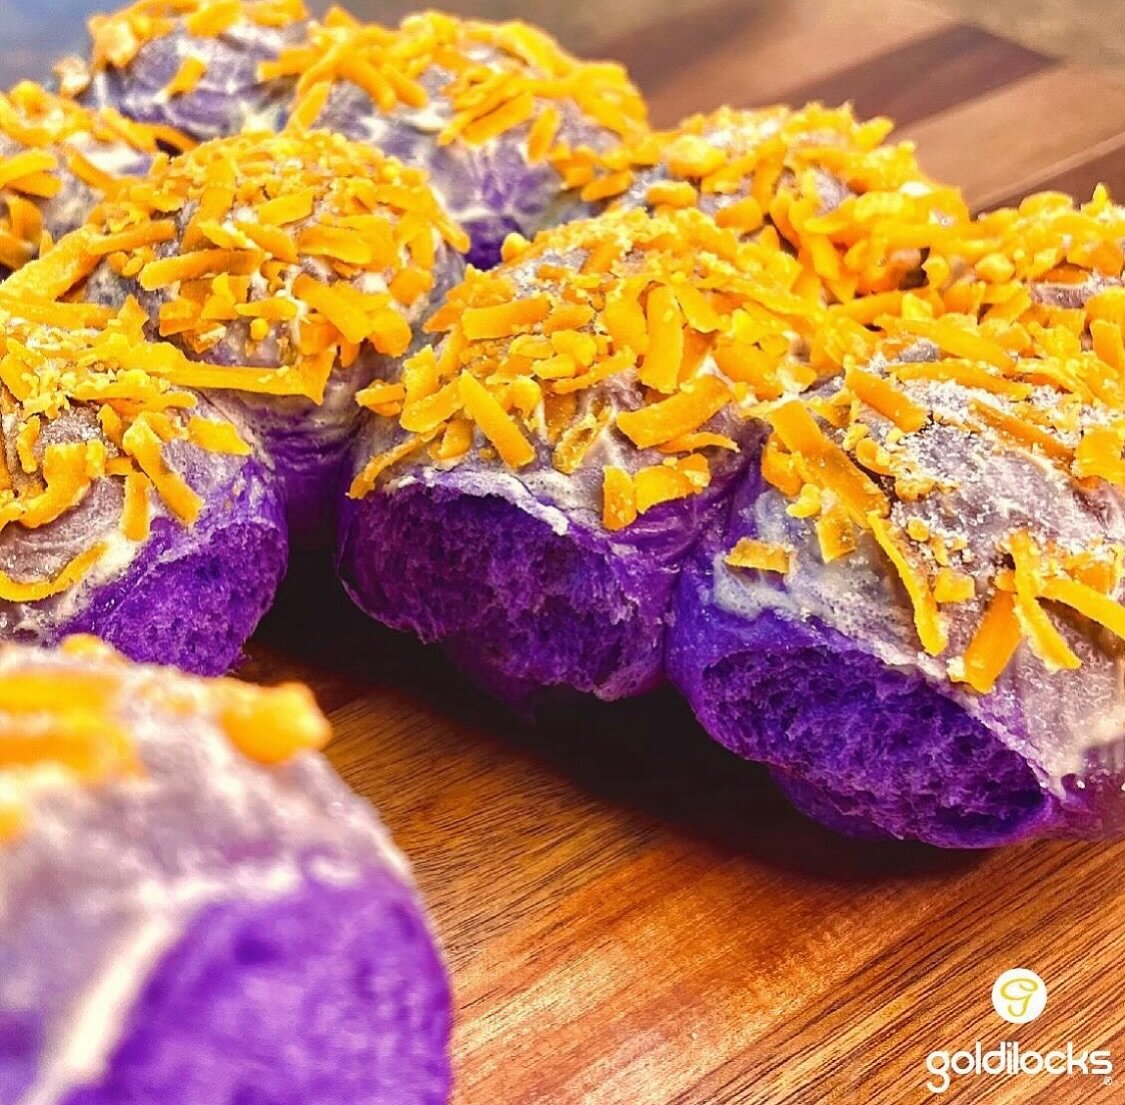 Marching into flavour town with our Ube Jonah Ensaymada! Only $5 for the whole month of March! #goldilockscanada #kumainkanaba